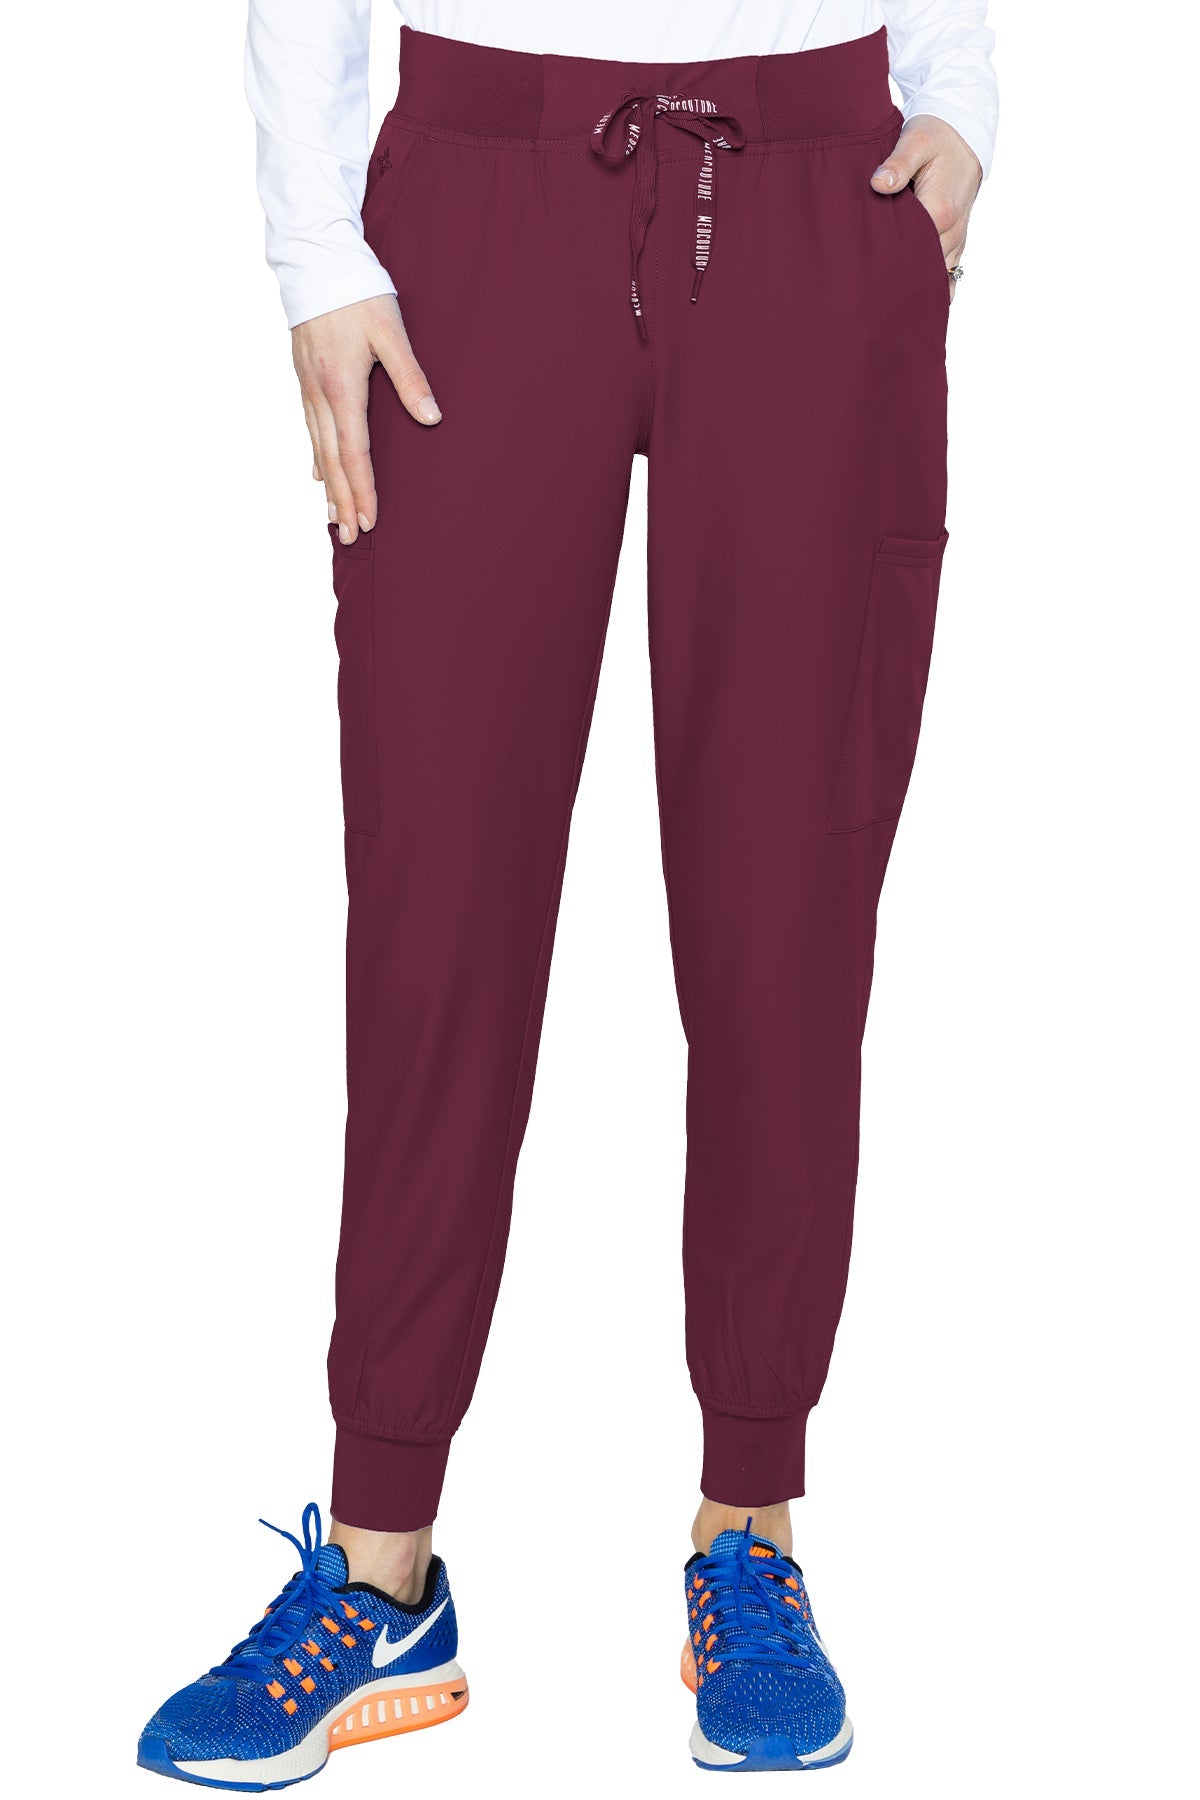 Petite 2711P Med Couture Insight Women's Jogger